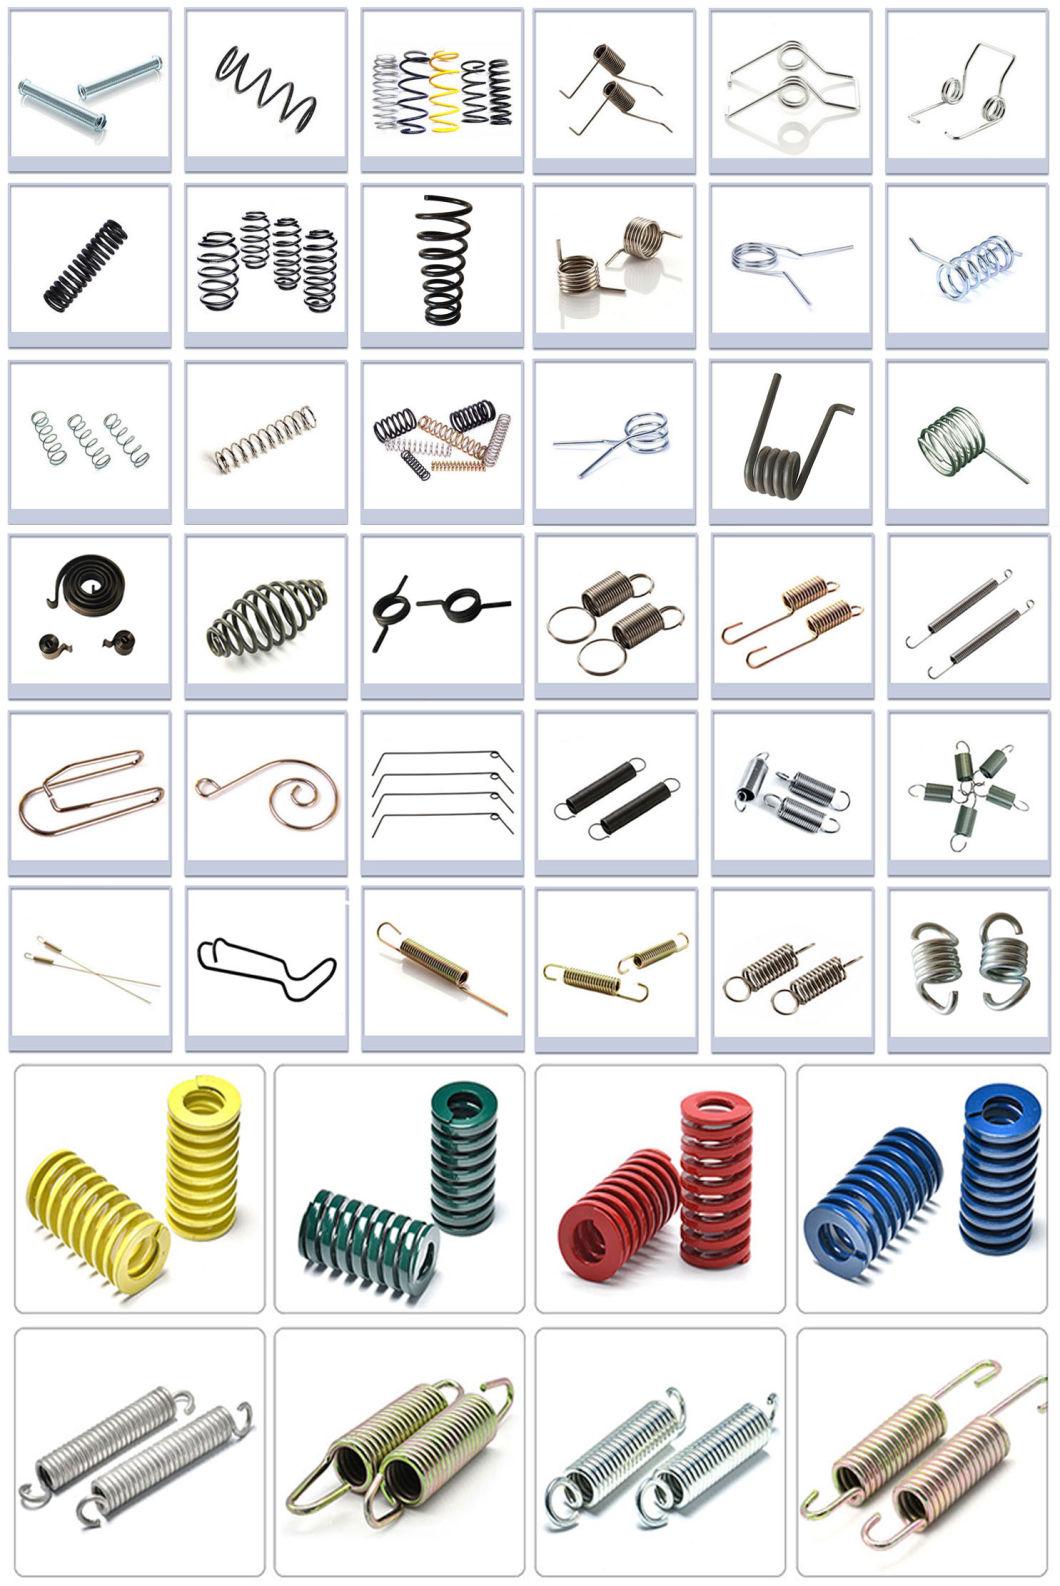 OEM Custom Various Stainless Steel Automotive Hardware Precious Metal Spring for a Exhaust Manifold Valve Reset Spring Parts